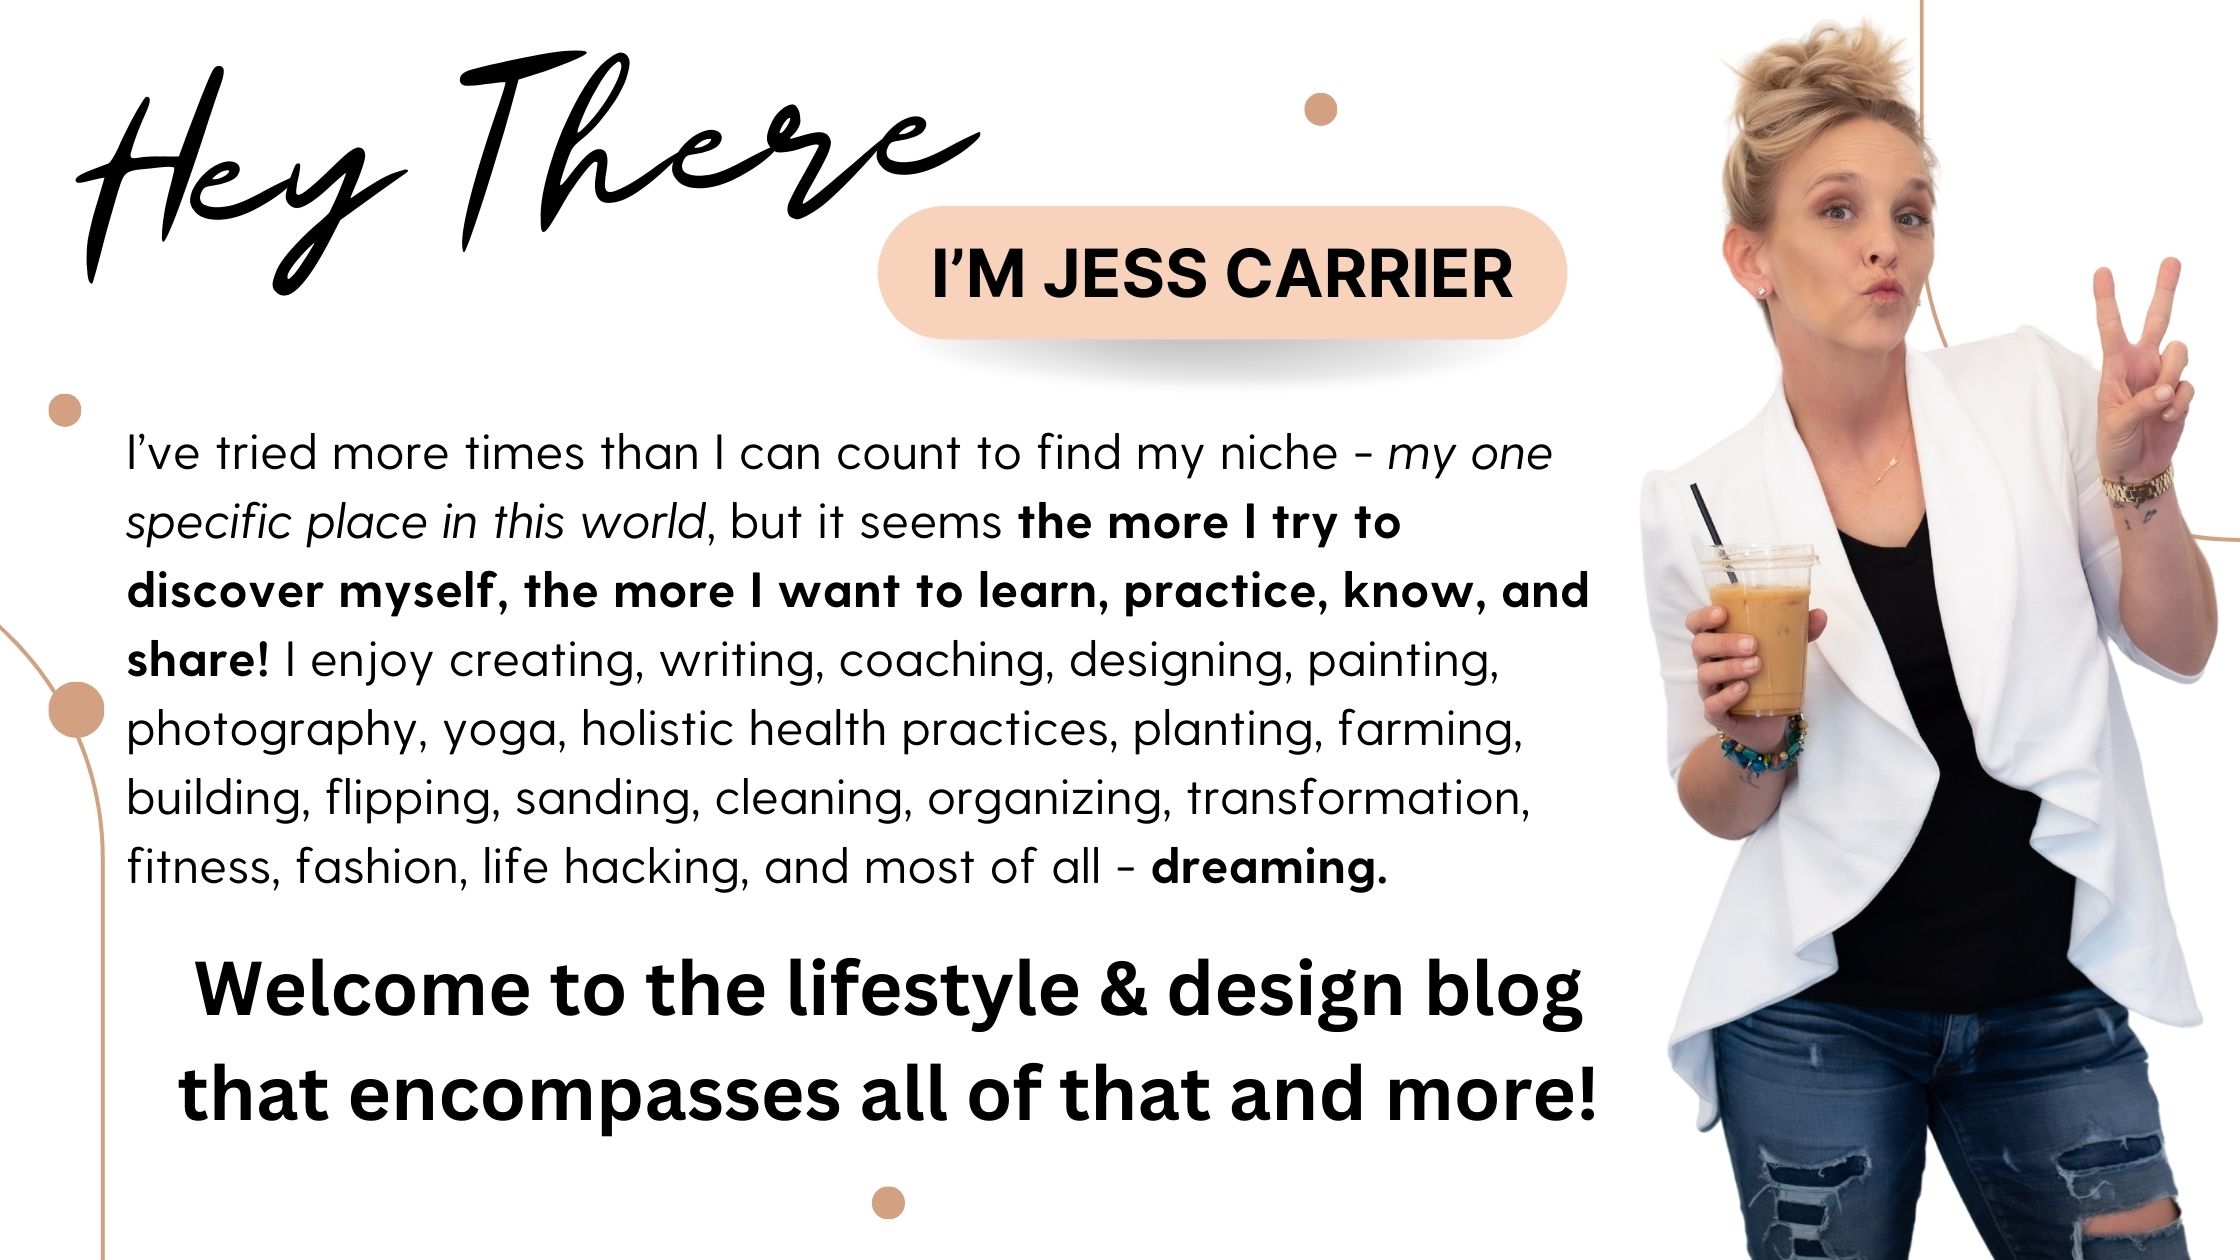 jess carrier lifestyle blogger health coach and author